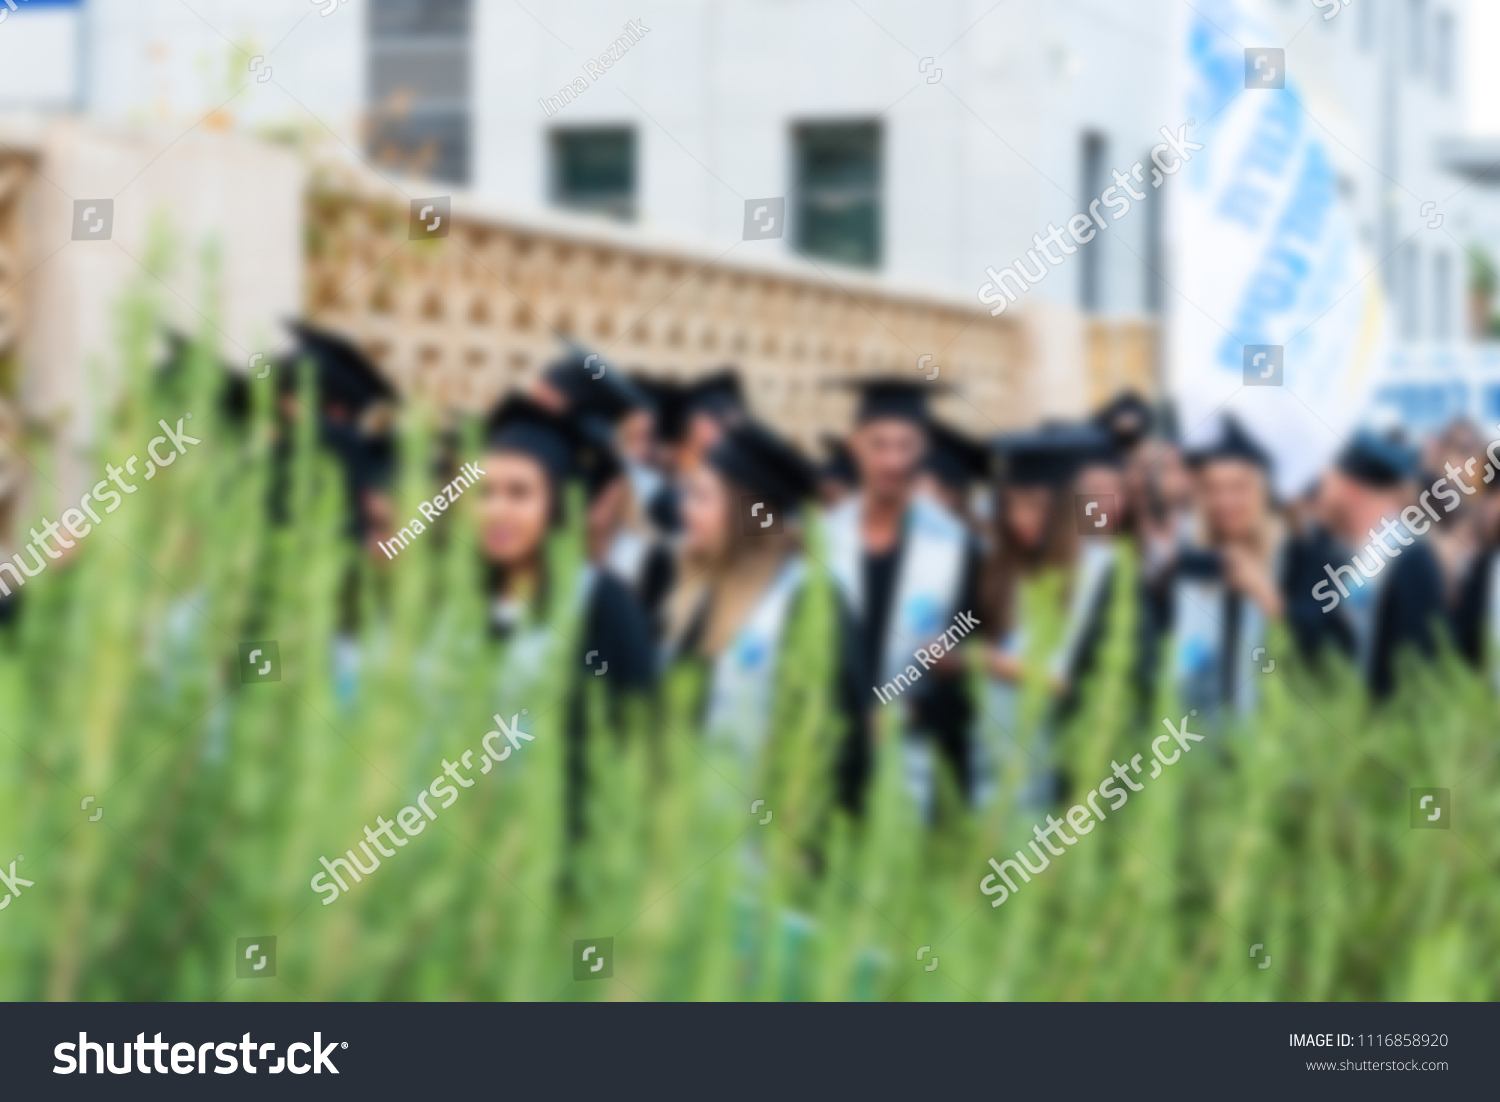 Blurred image College students at Graduation Ceremony.Group happy multiple races students in mortar boards and bachelor gowns outdor. #1116858920